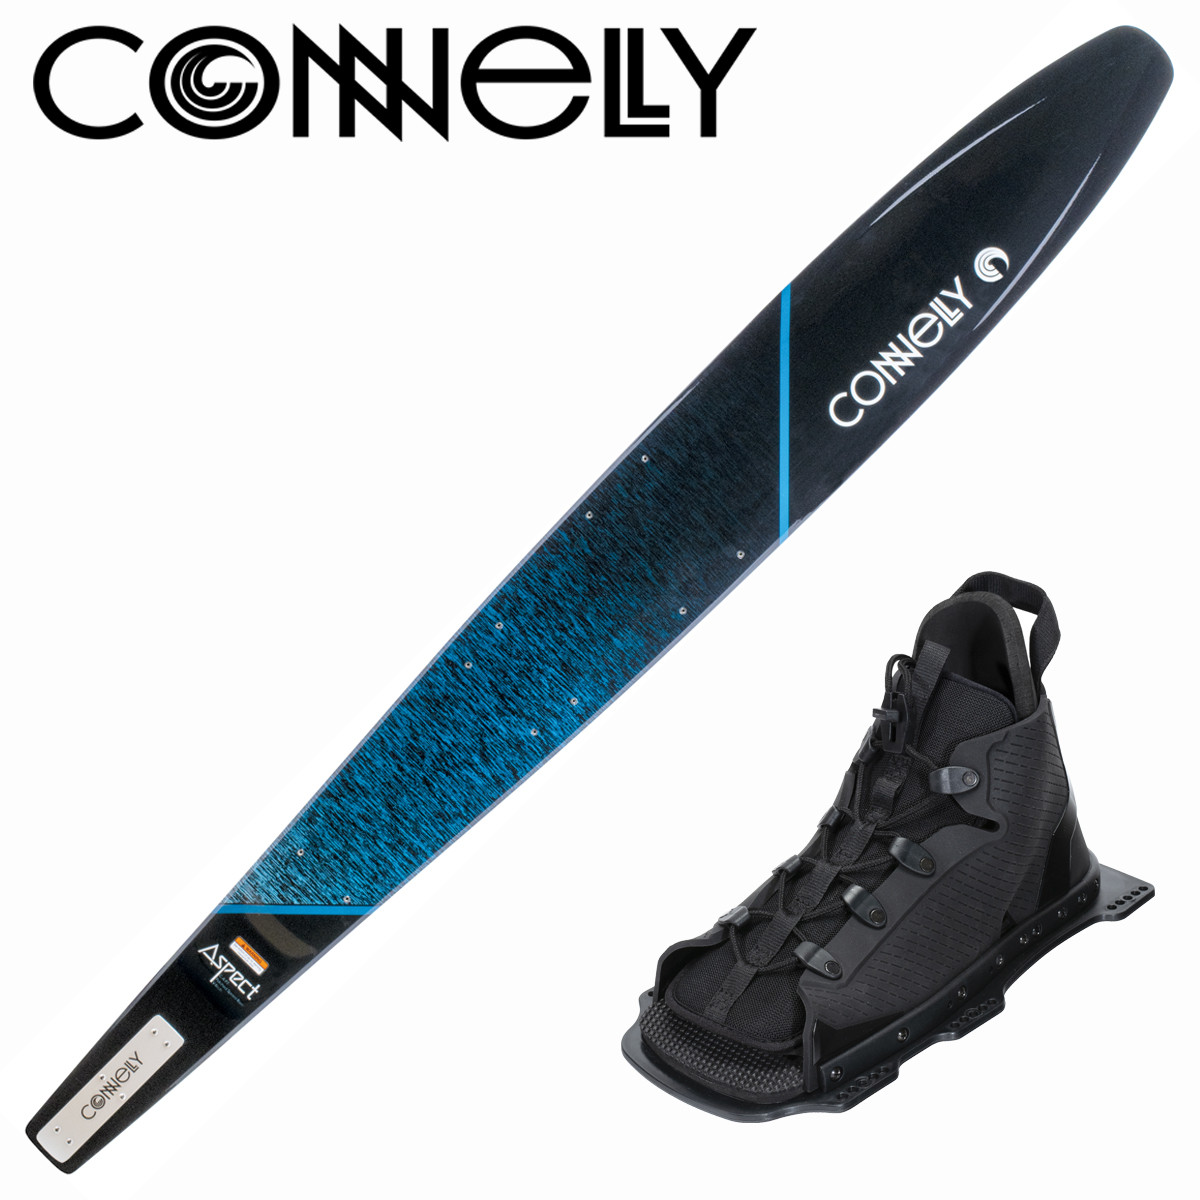 Connelly Aspect Slalom Waterski with Swerve Binding and Rear Toe Strap